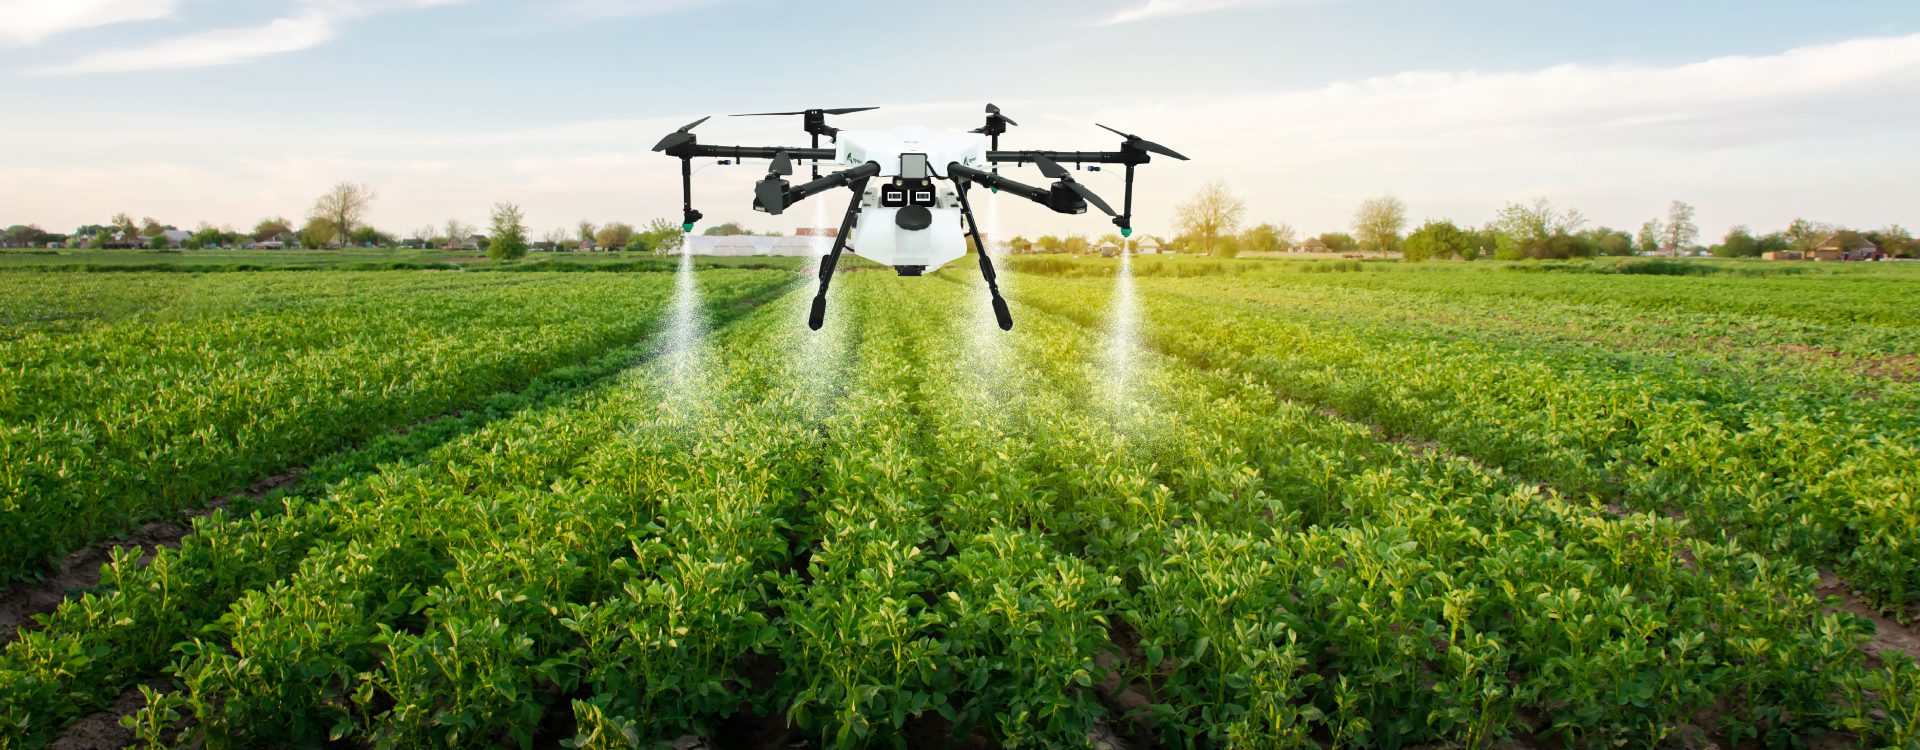 Farming Drones for Crop Monitoring in India